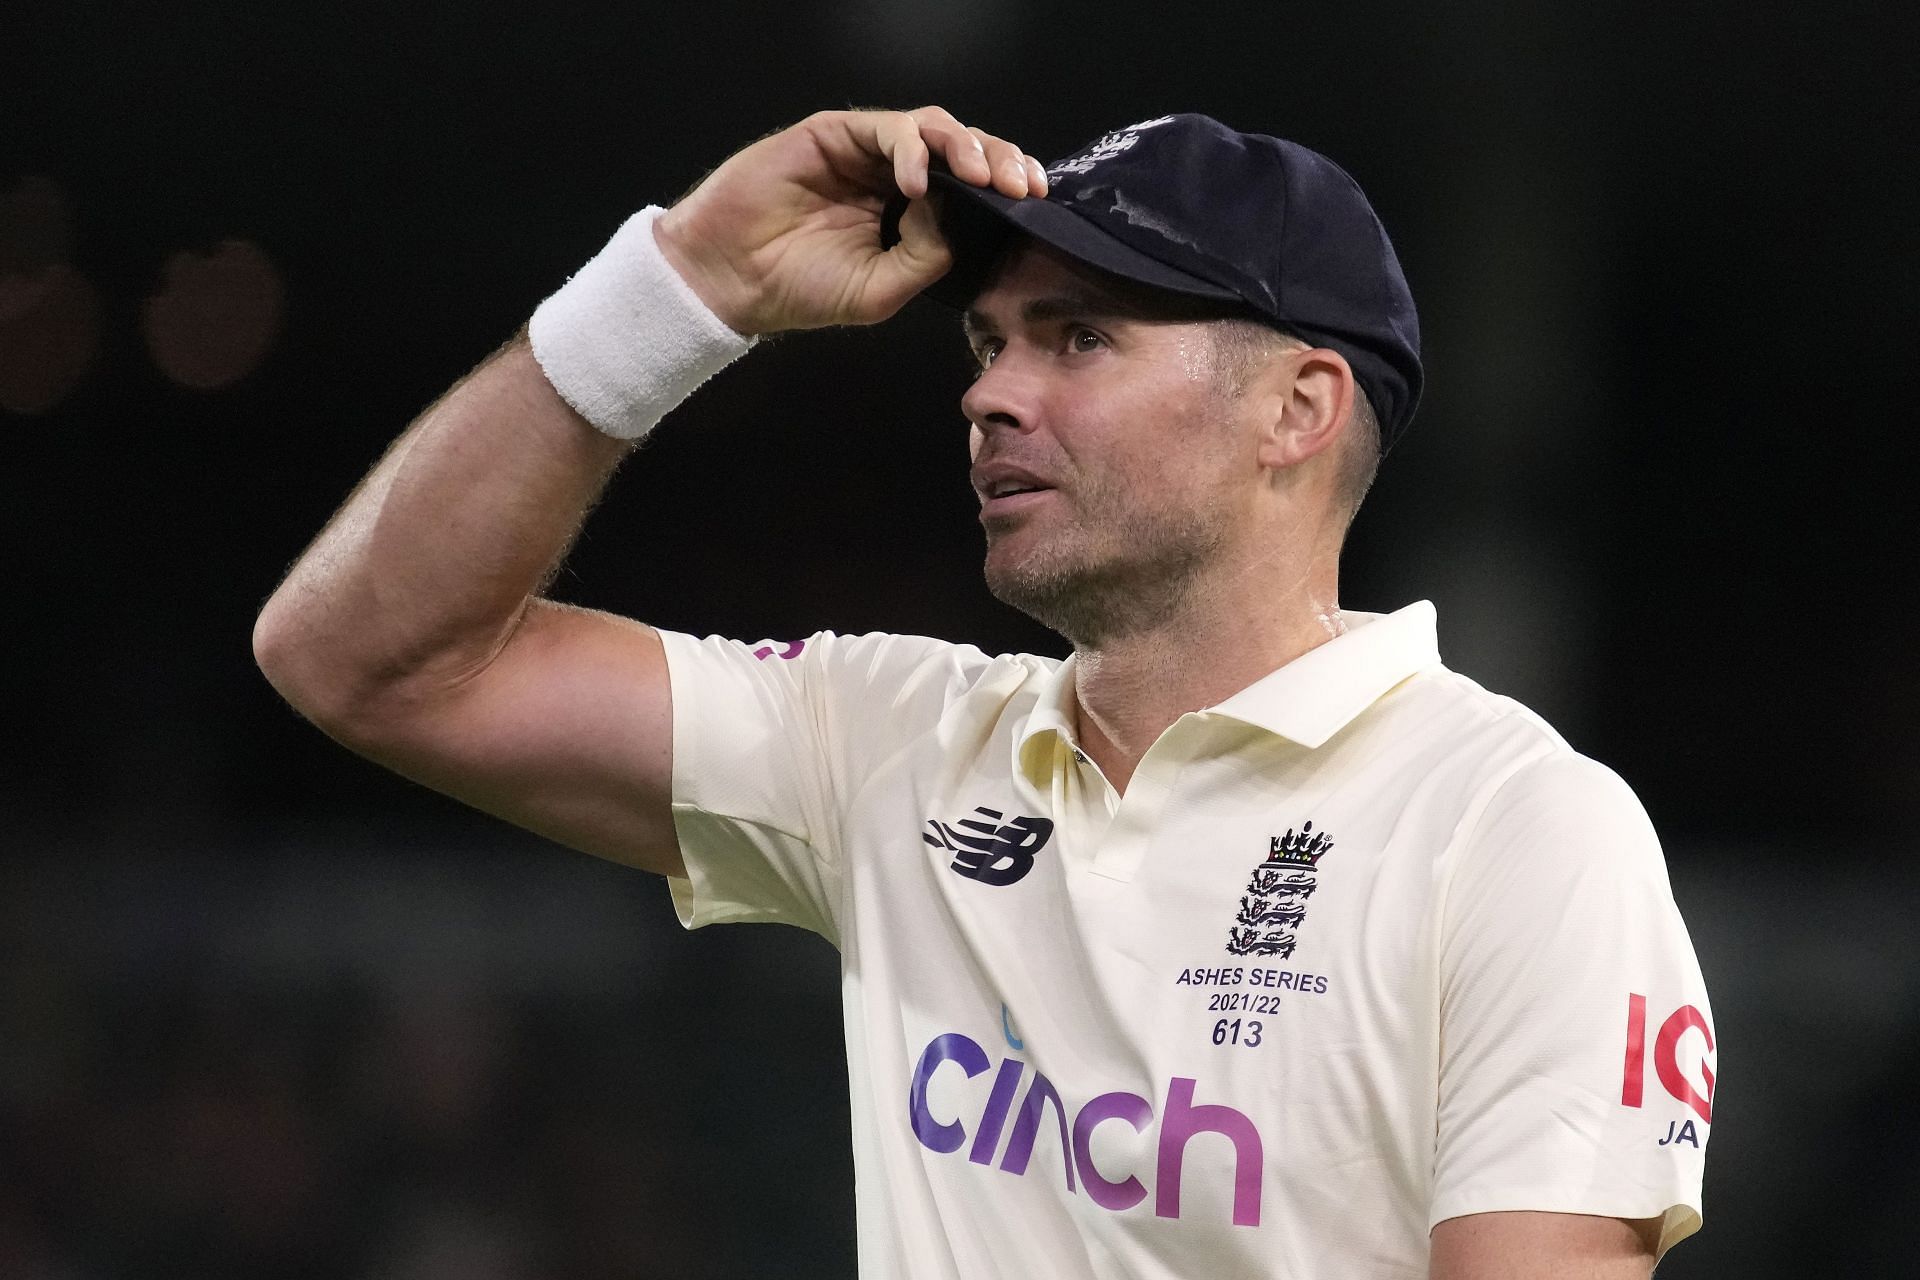 James Anderson registered figures of 4-33 in the first innings of the Boxing Day Test